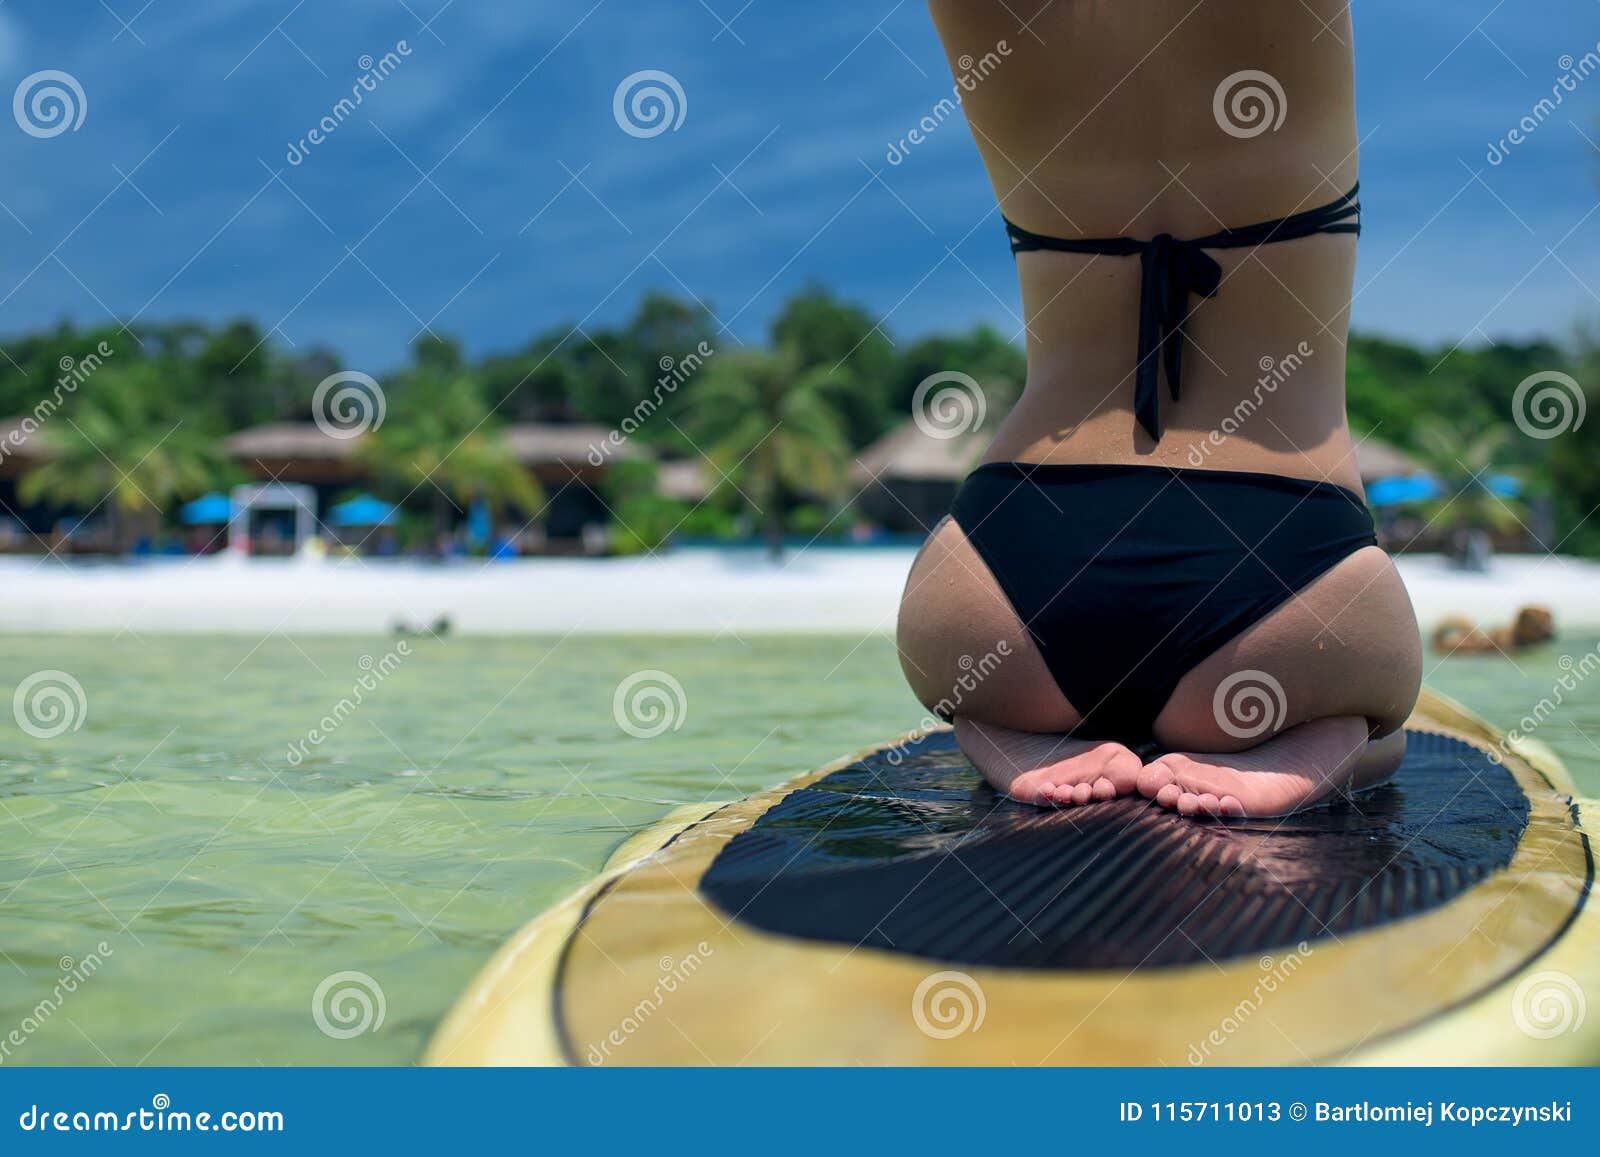 Girl Swimming at the Paddle Board picture